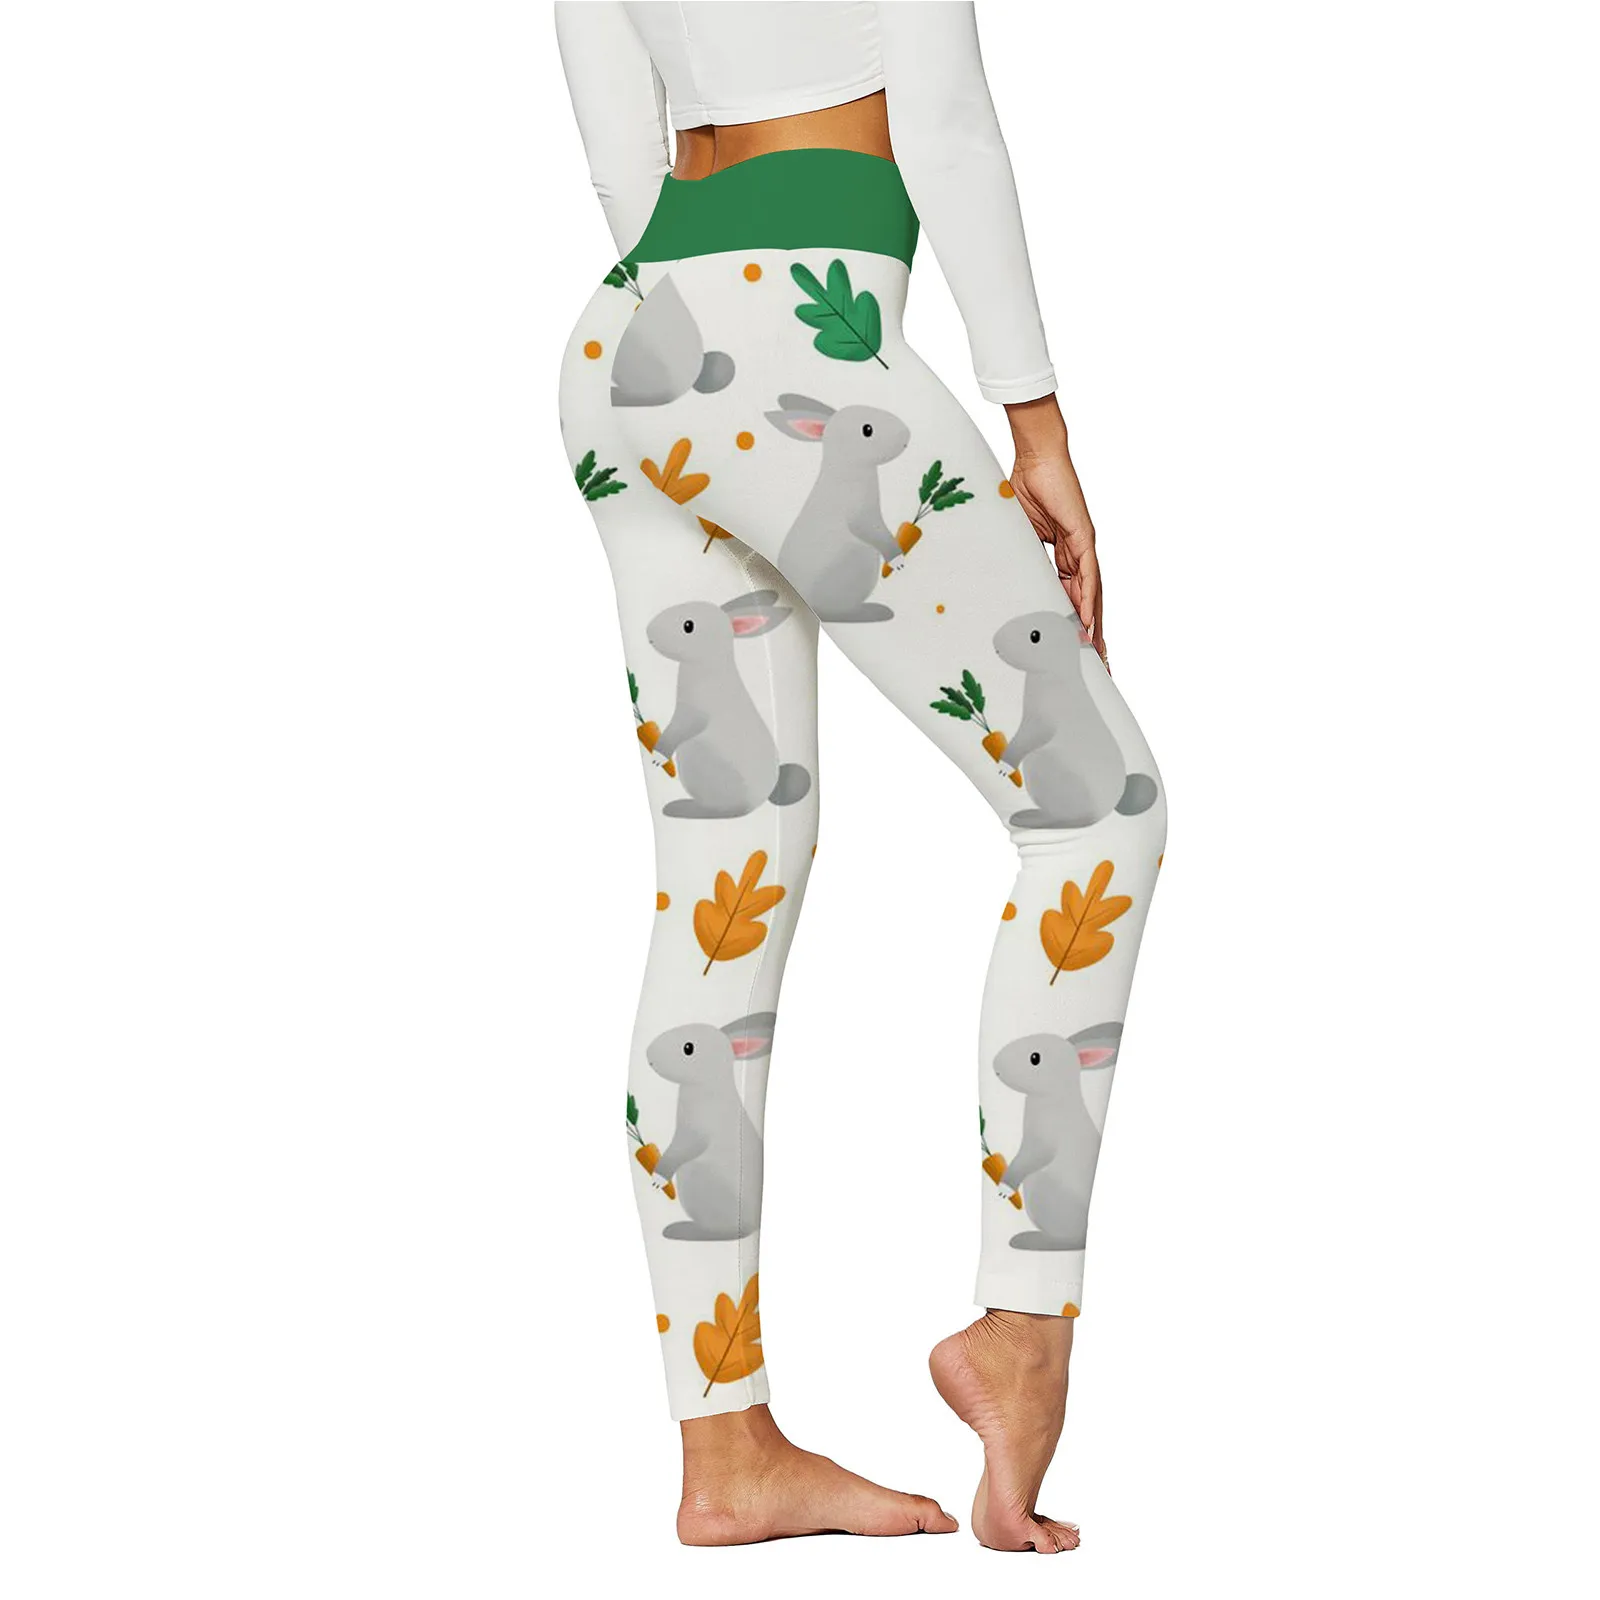 

Women Easter Bunny Rabbits Printed Leggings Female Sports Gym Yoga High Waist Sexy Pants Workout Pantalones Spring Tight Clothes